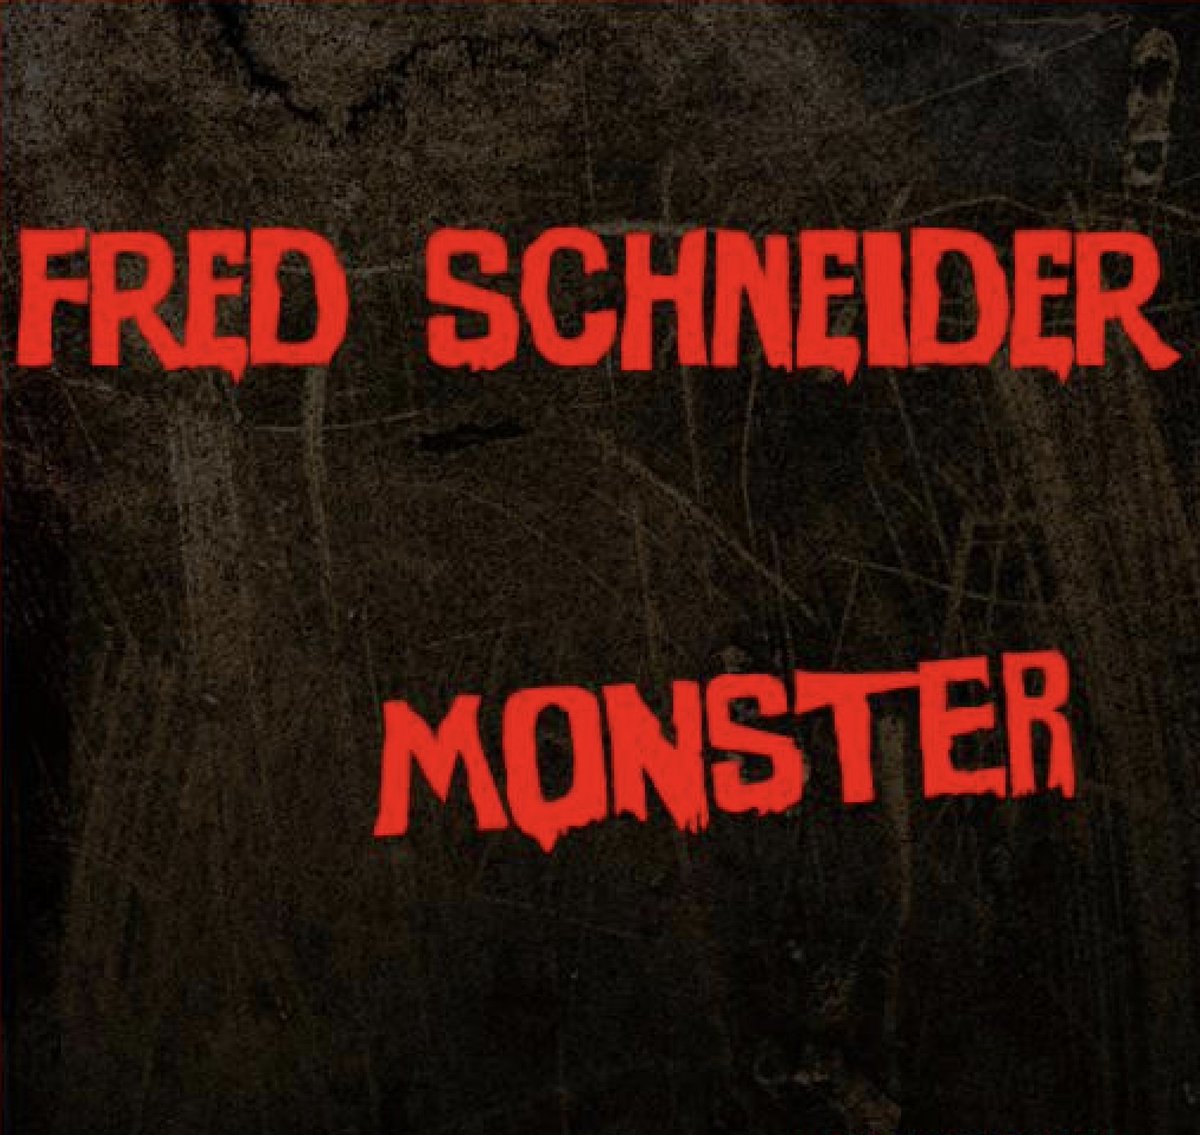 'Oh No!😱A giant MONSTER!'🤖👾💀
@FredSchneider3 - MONSTER 
A @peacebisquit Naughty Mix
💫Stoked to share our slight rework of this '84 synth pop masterpiece.
🔊 youtu.be/a6kbAmCMzrs?si…
🔊🔥DJ Download (*Limited) soundcloud.com/peace-bisquit/…
💫Prod by @BernieWorrell & Fred Schneider